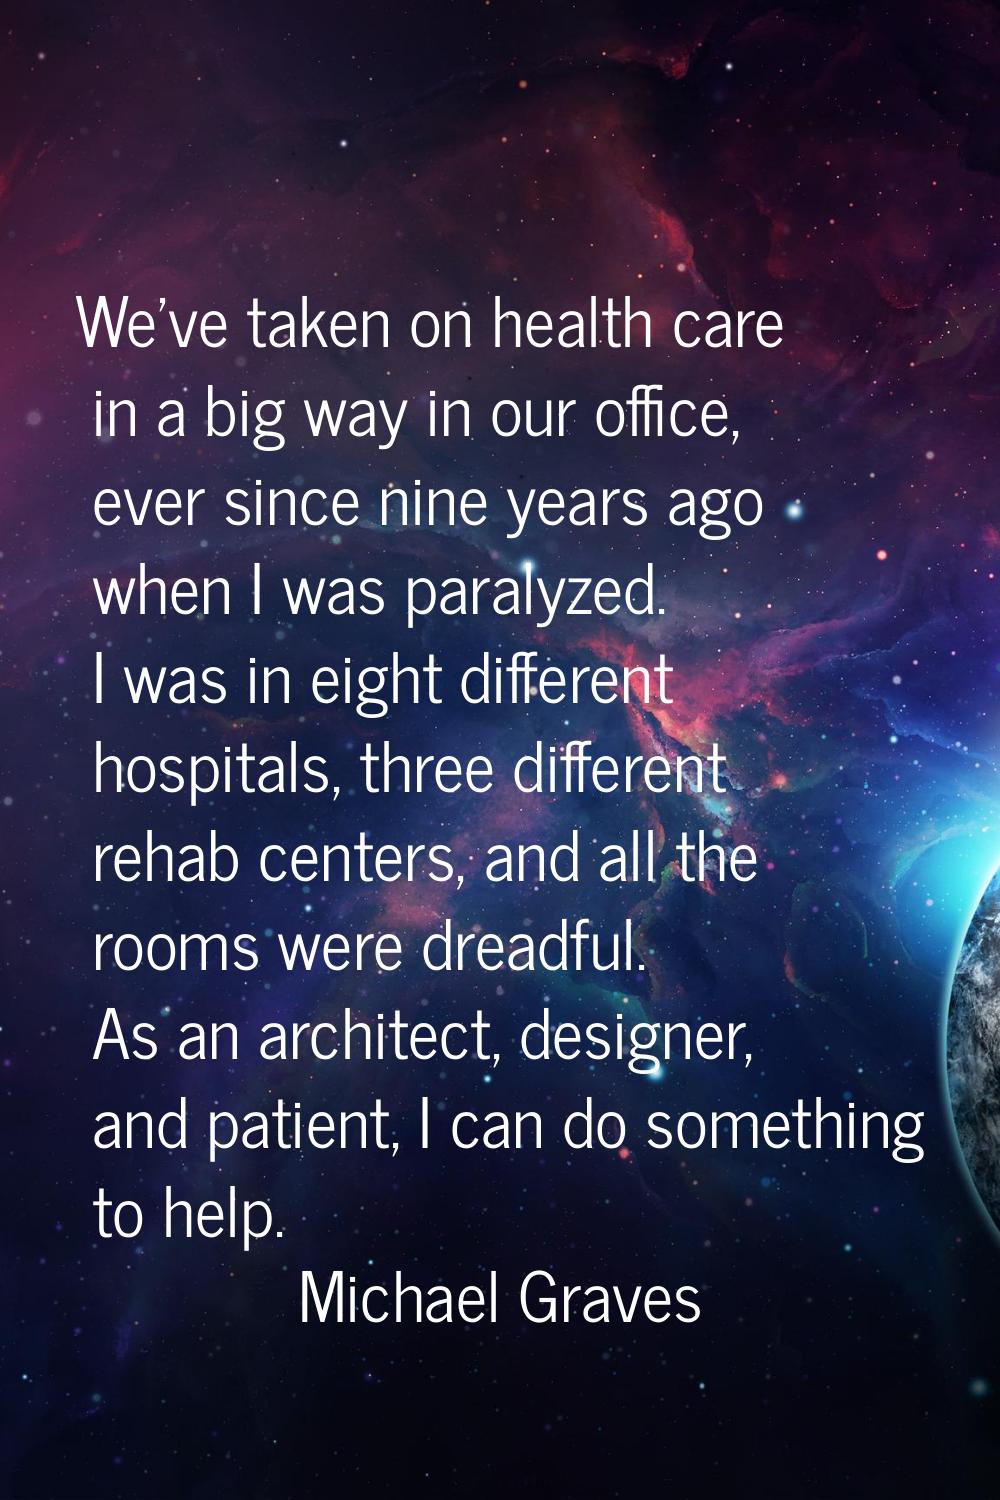 We've taken on health care in a big way in our office, ever since nine years ago when I was paralyz